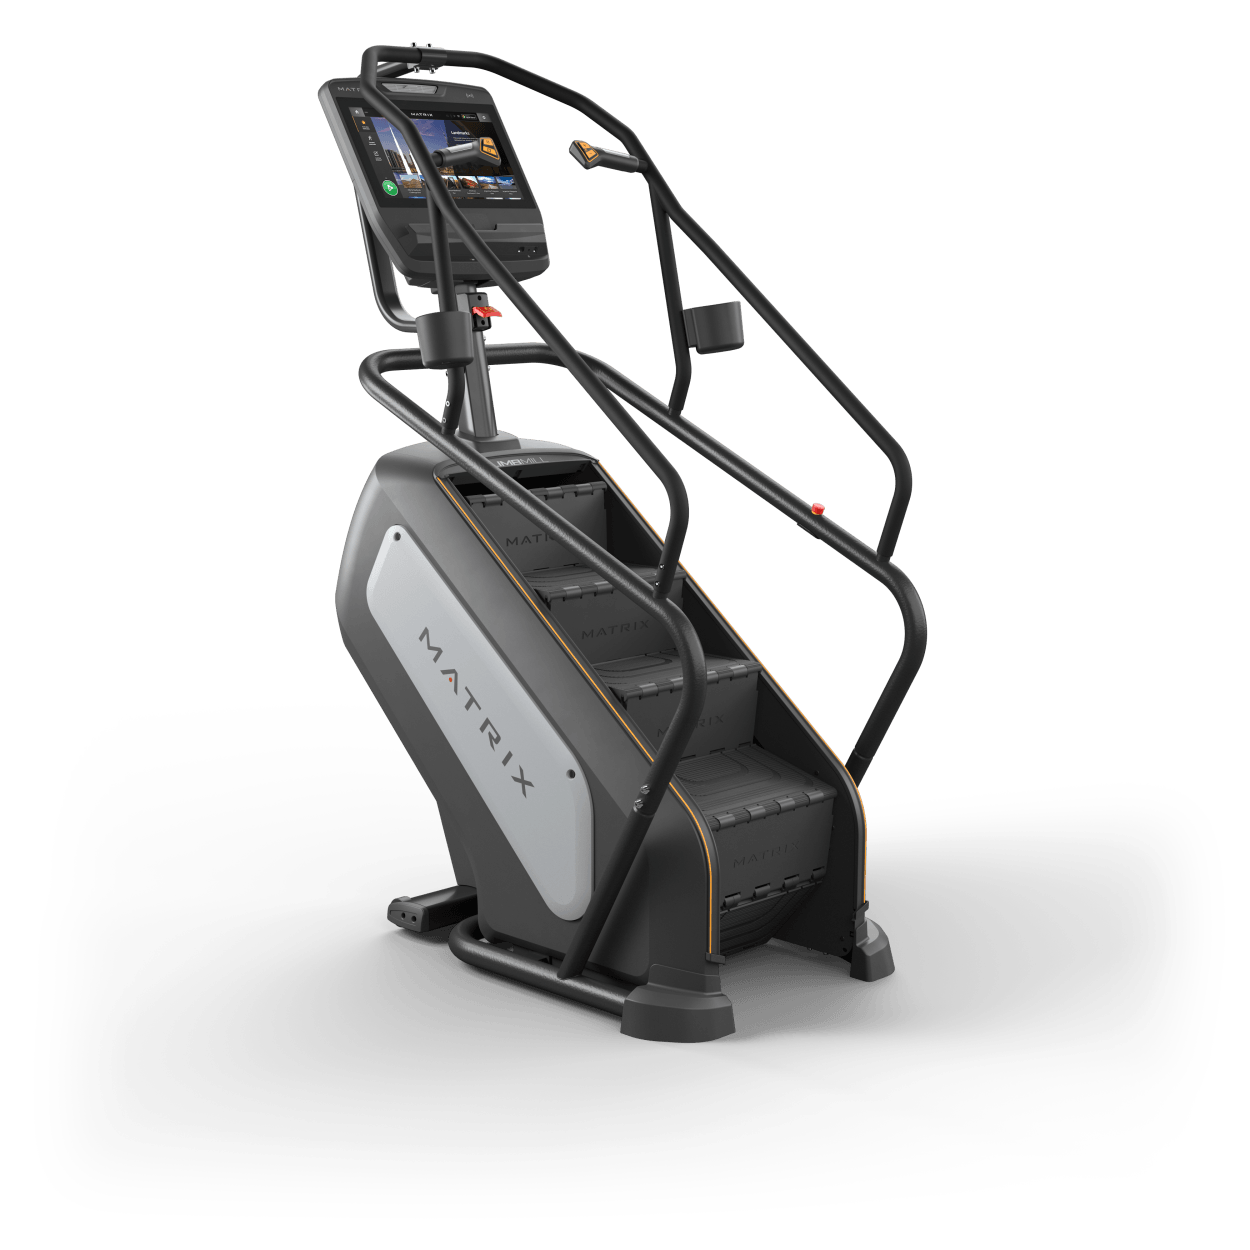 Matrix Fitness Endurance Climbmill with Touch XL Console full view | Fitness Experience